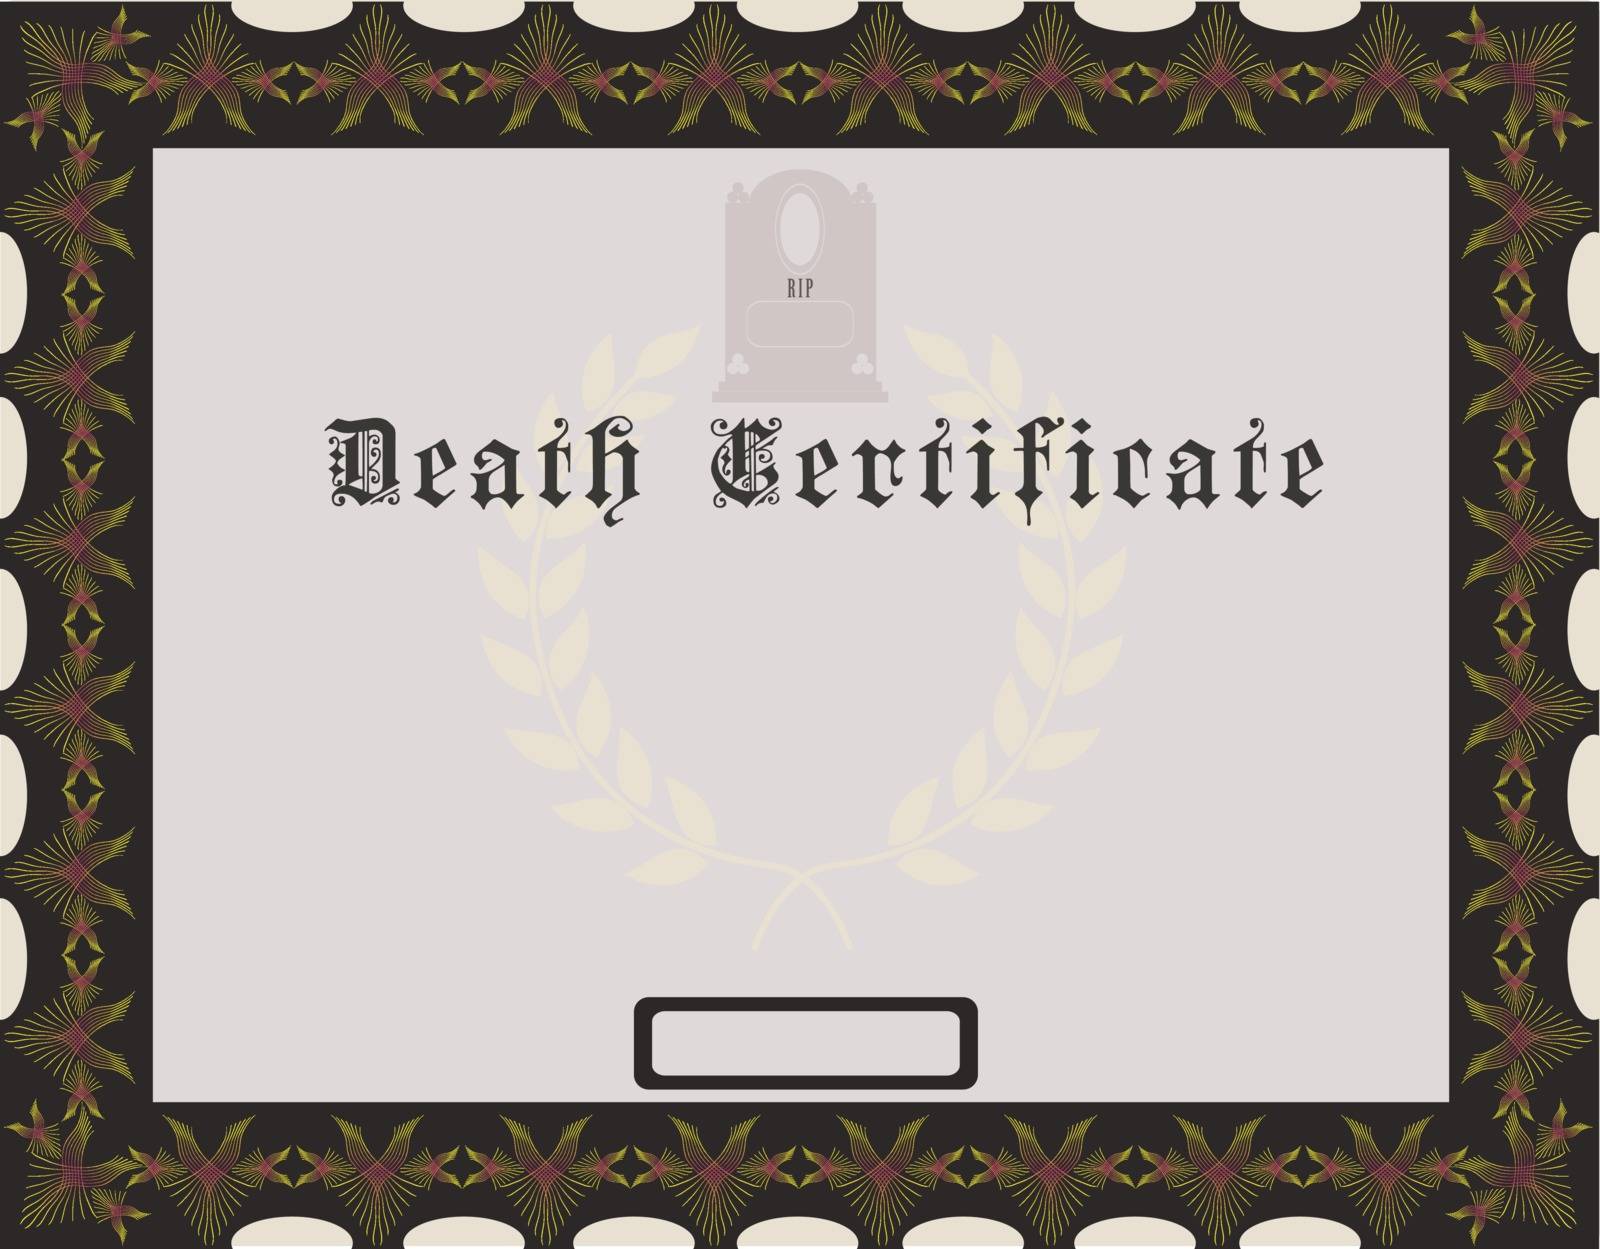 Certificate of death with tombstones, vintage design. Vector illustration.